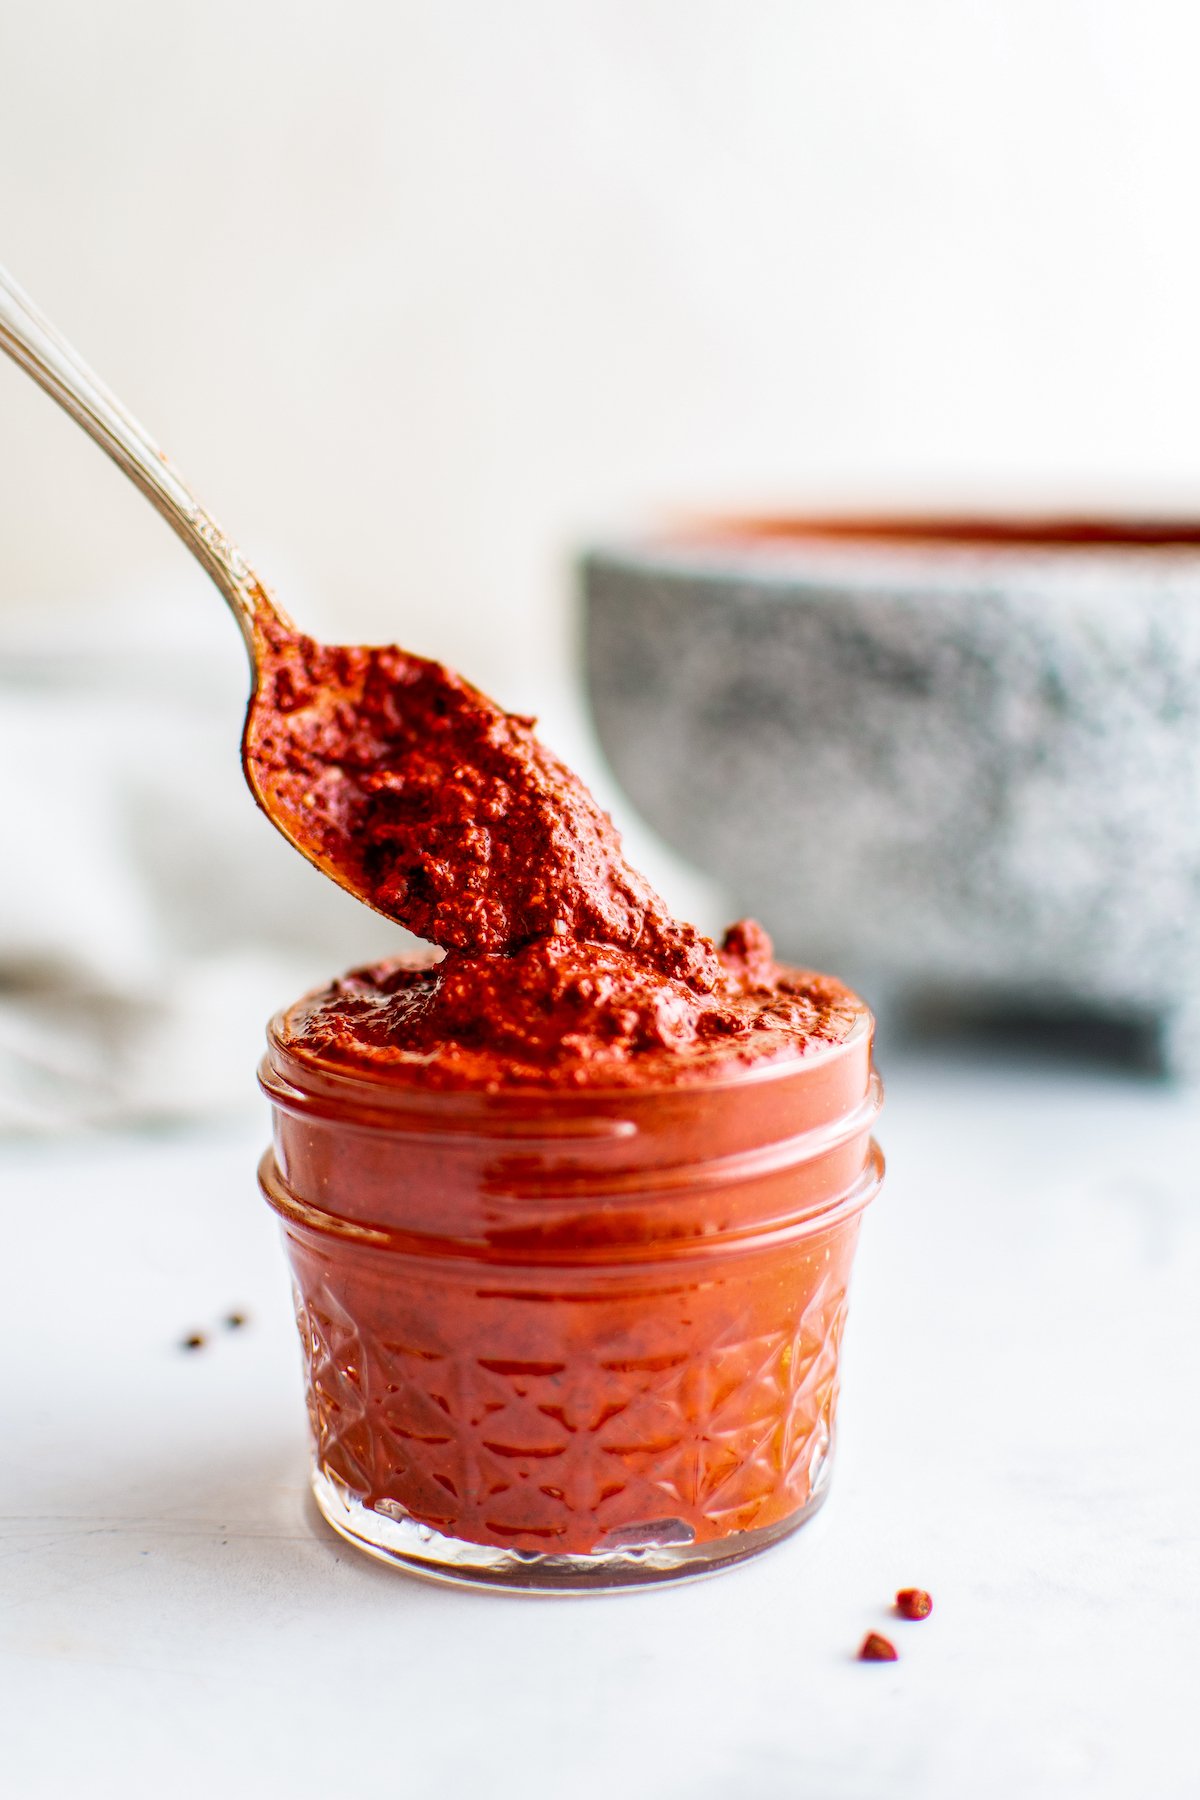 achiote paste which is a bright red meat rub in a small mason jar